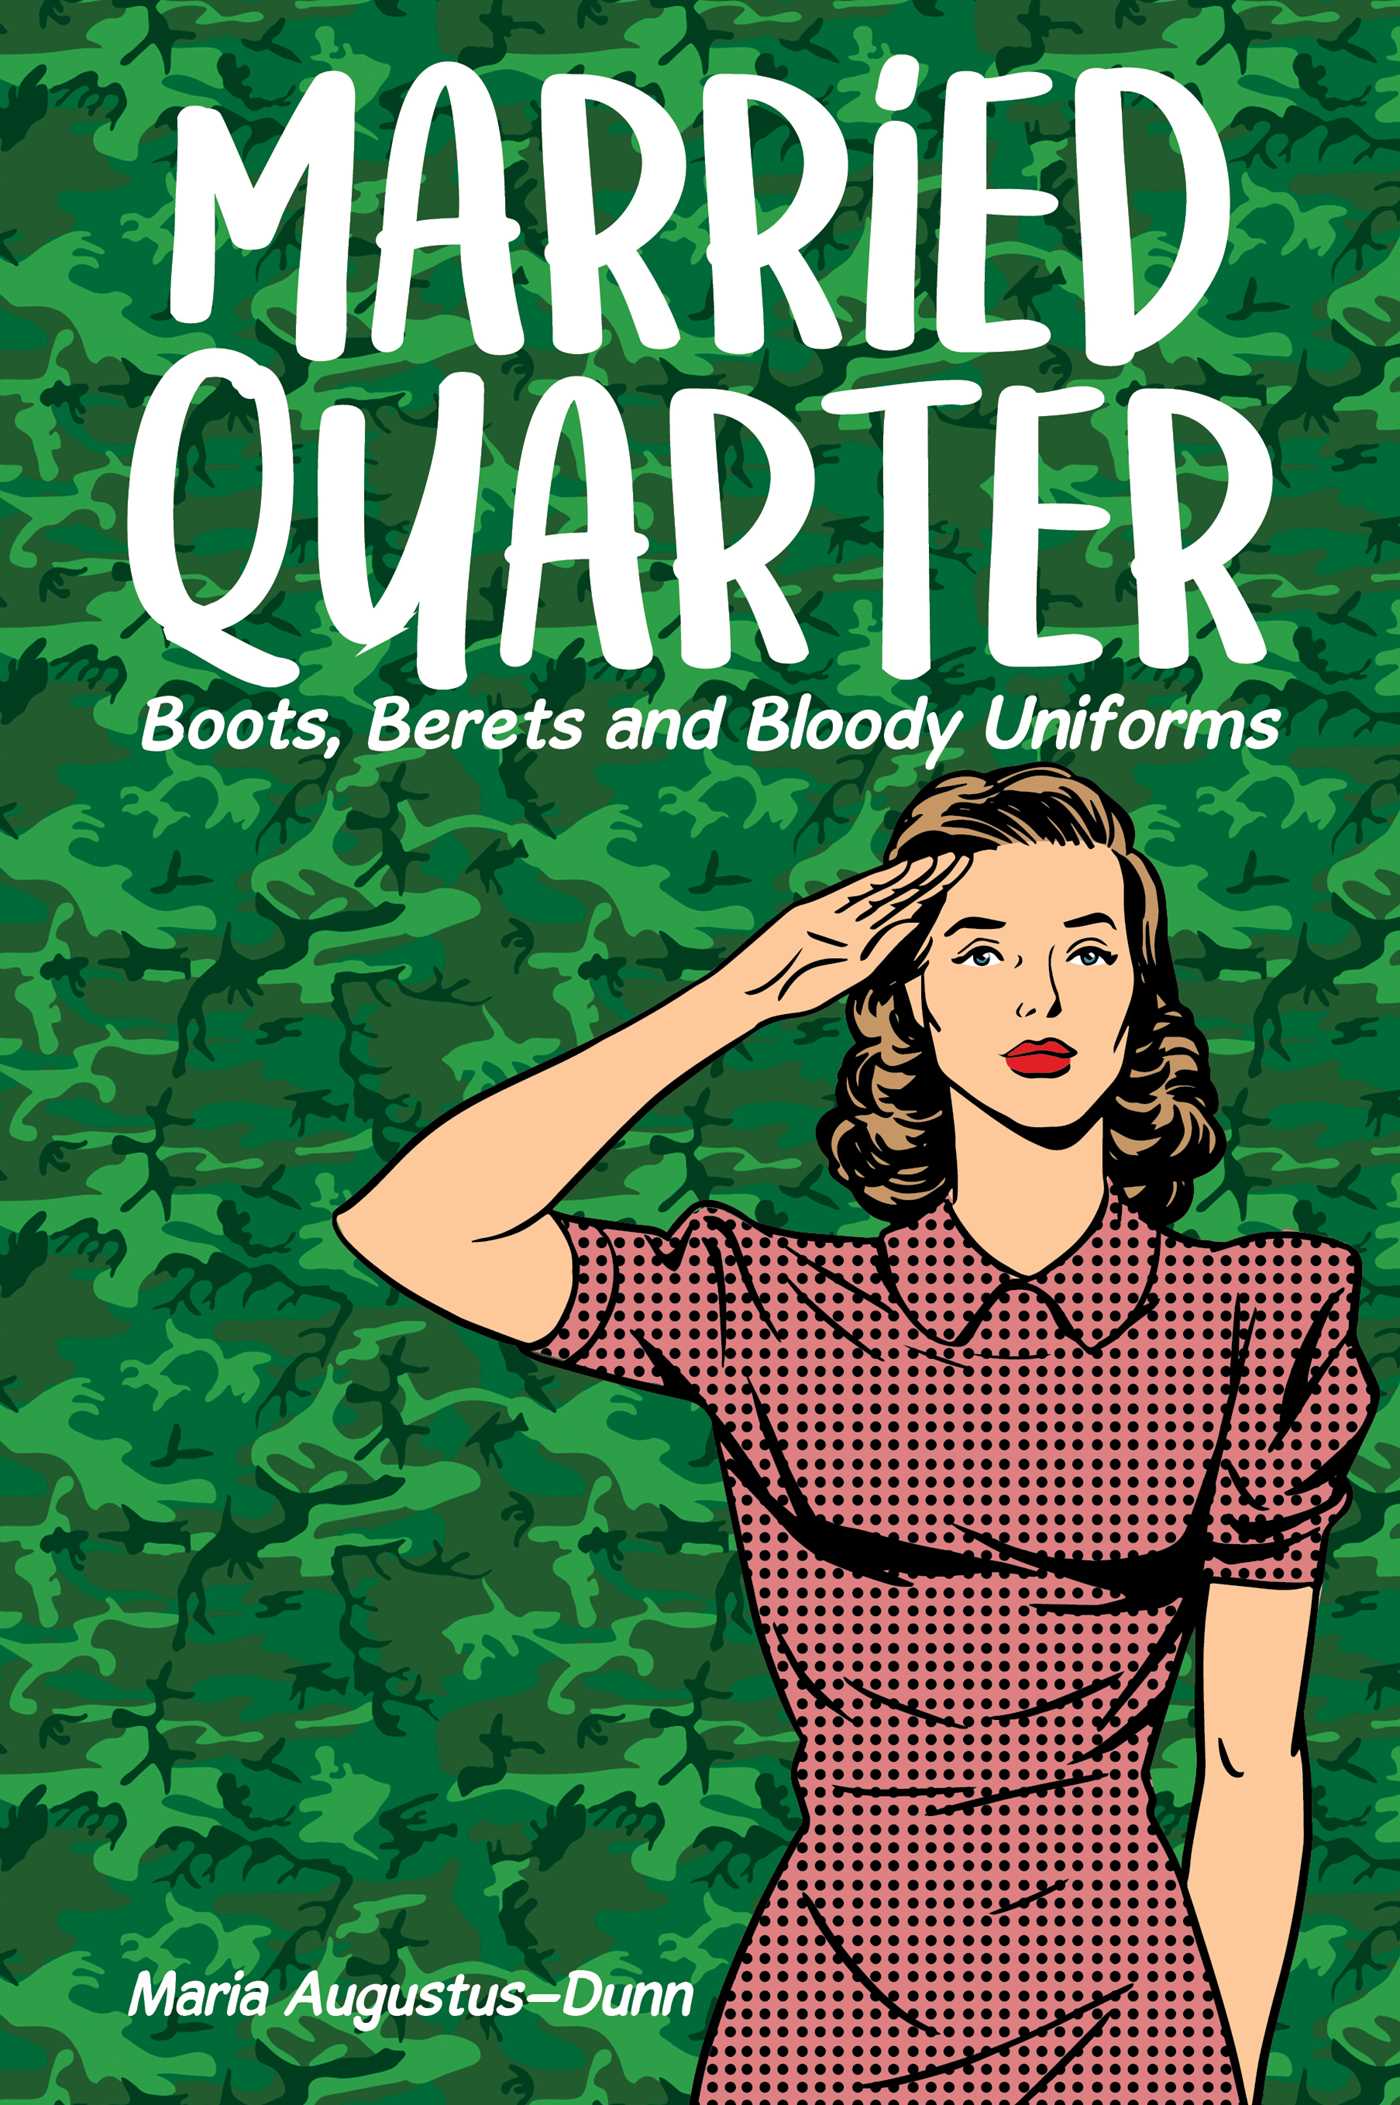 Married quarter: Boots, berets and bloody uniforms